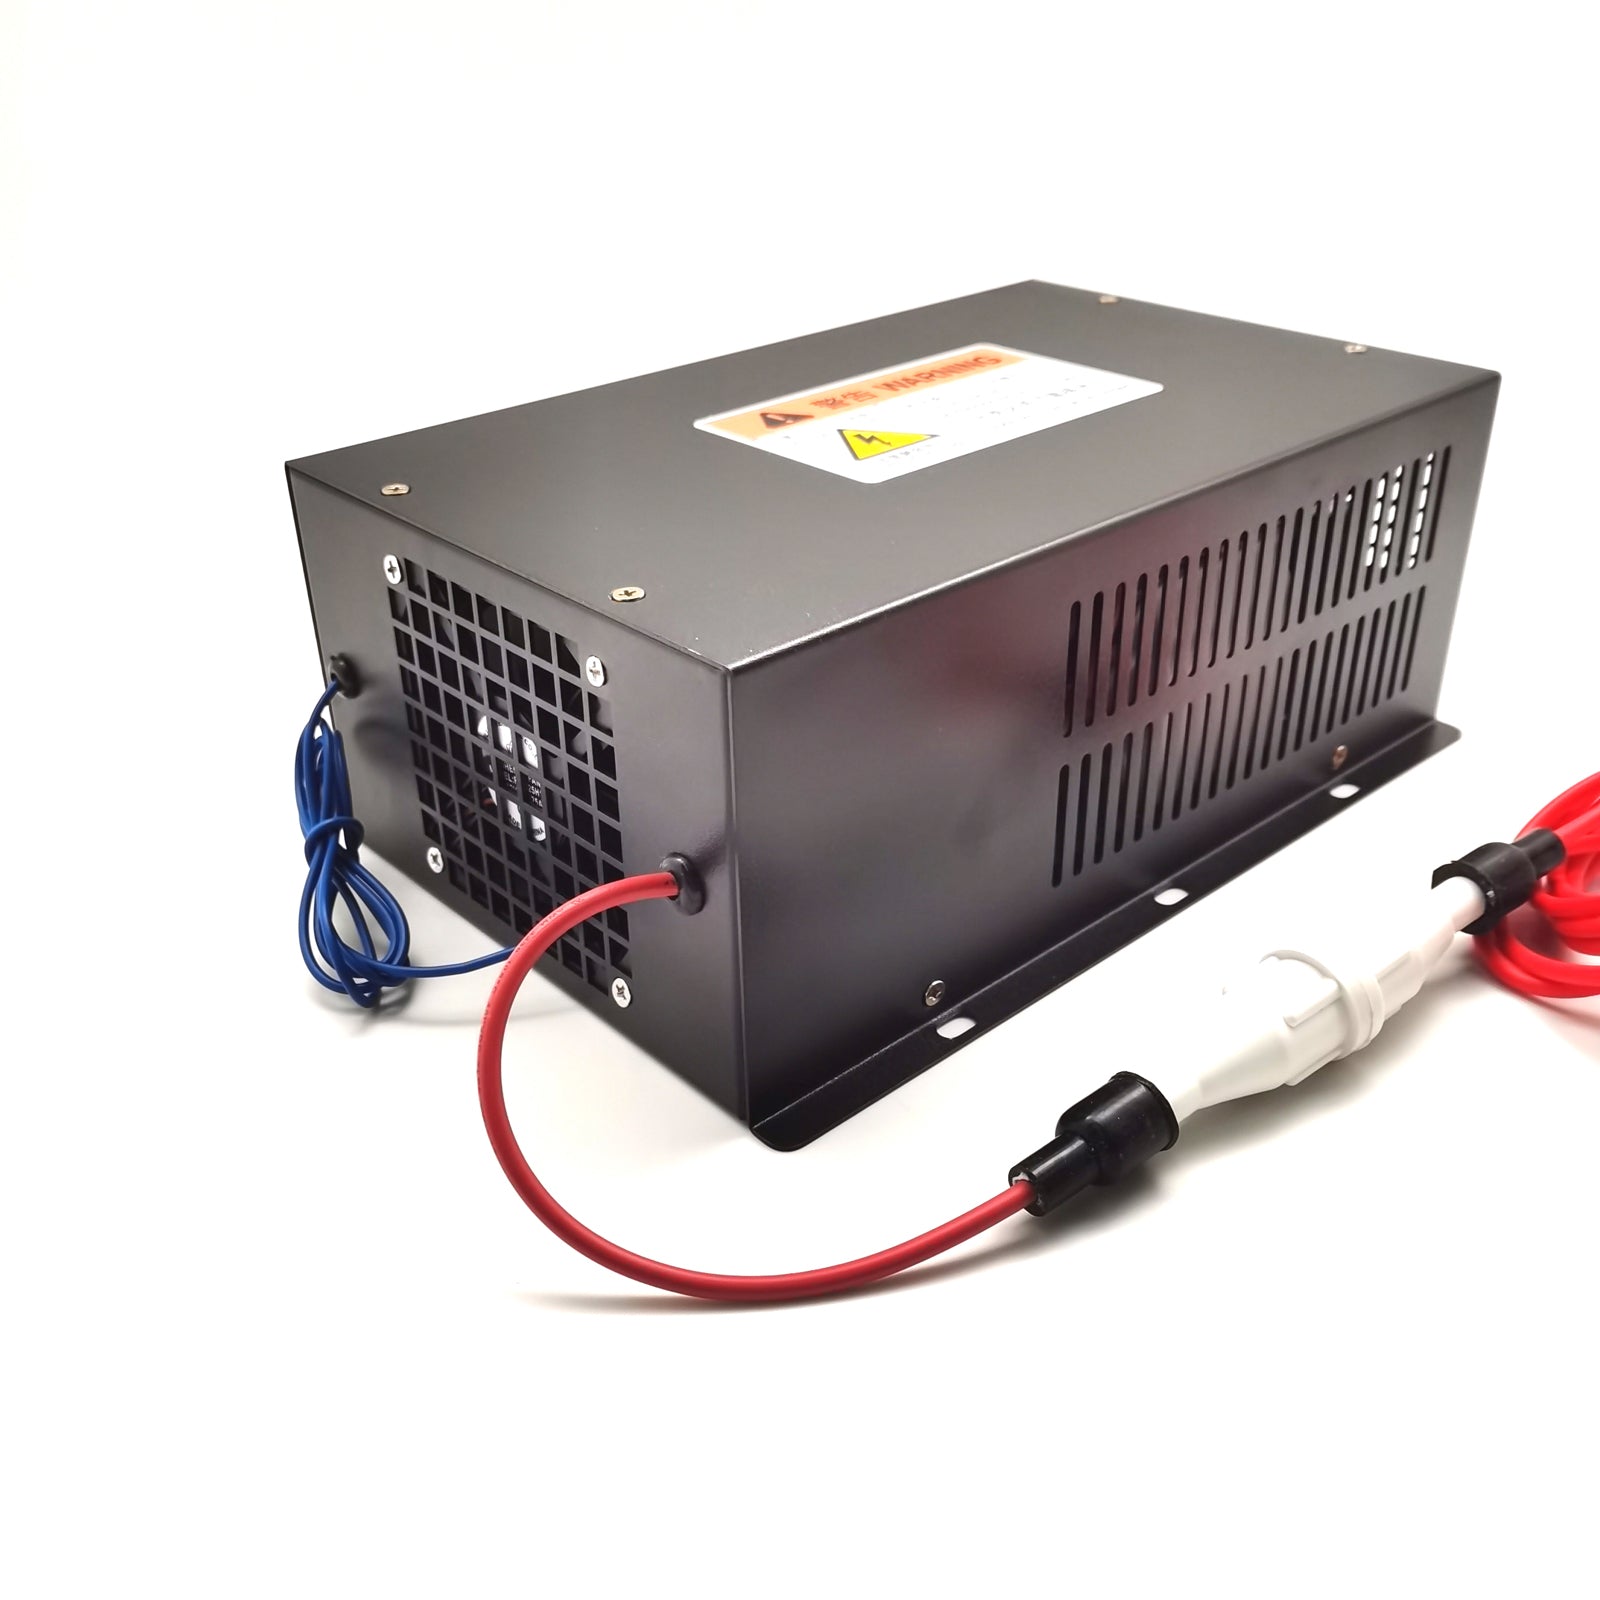 MYJG Series CO2 Laser Power Supply For 40W 50W 60W 80W CO2 Laser Engraver & Laser Tube